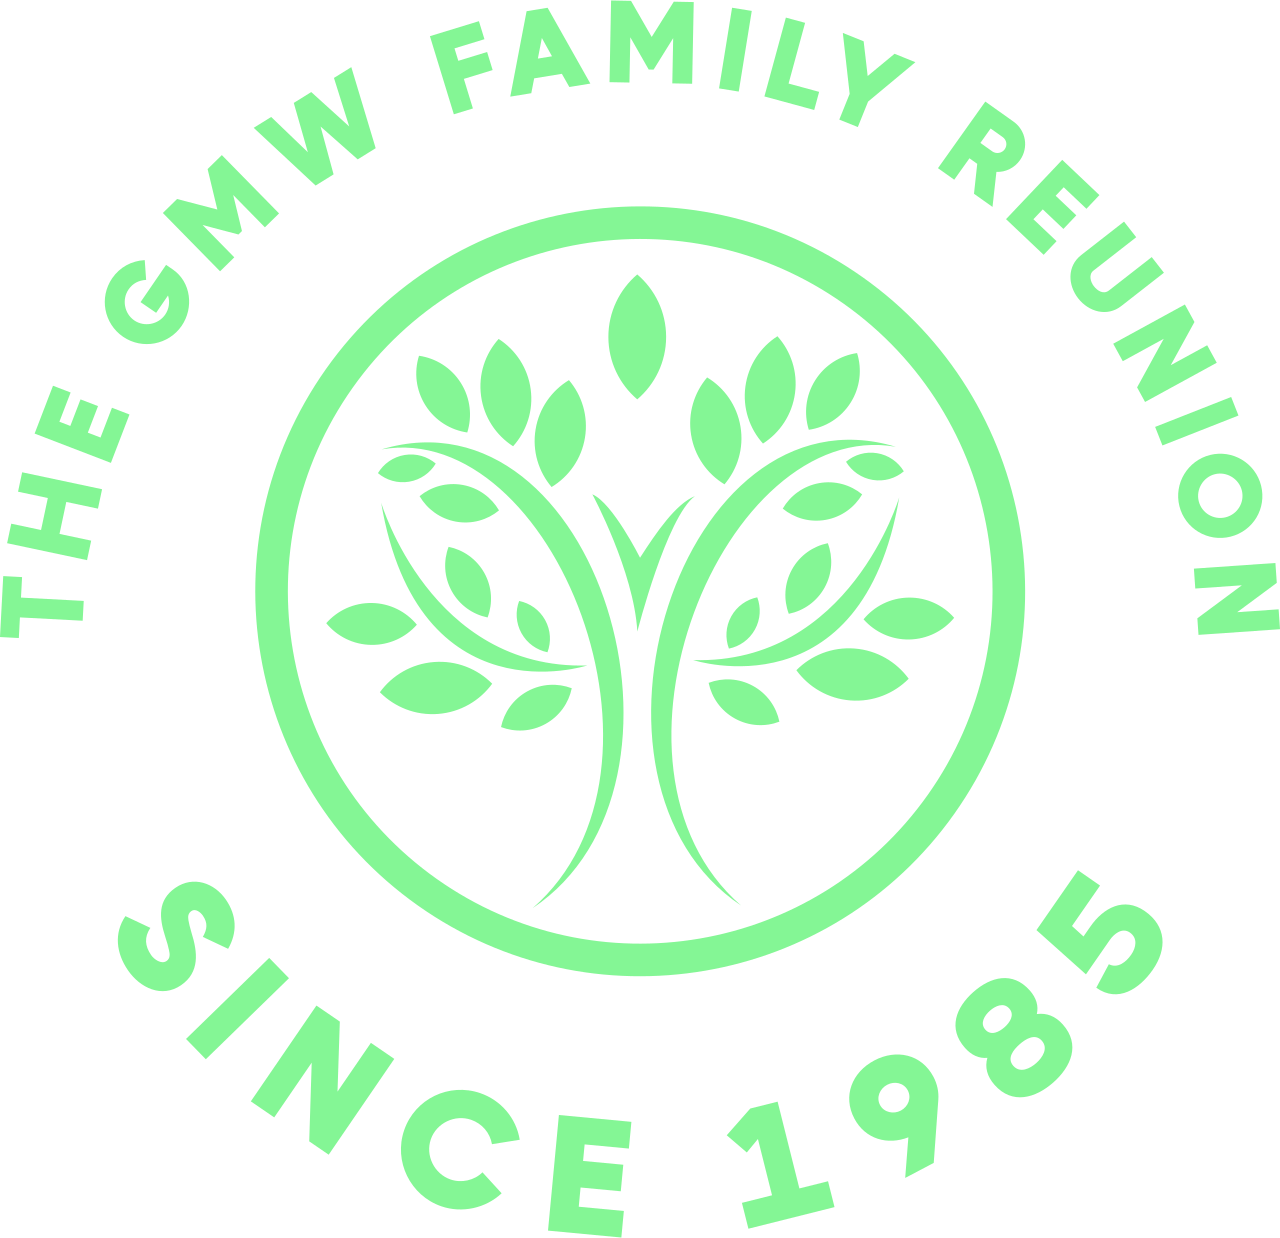 THE GMW FAMILY REUNION's web page